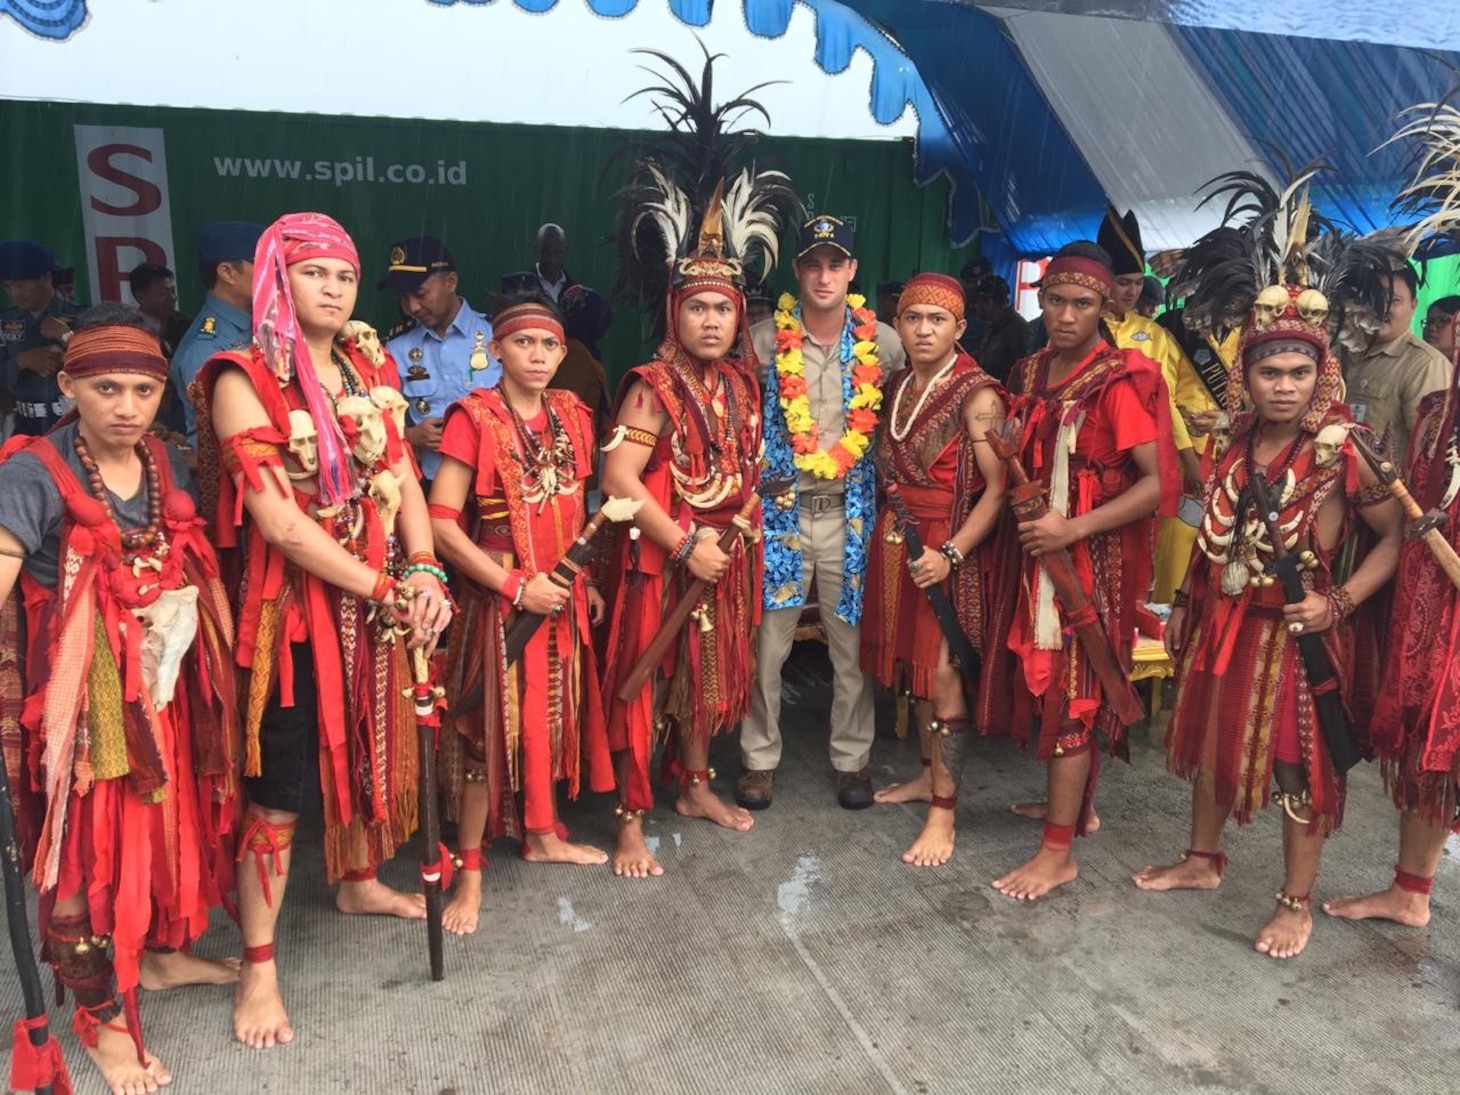 Civilian mariner Capt. Adam Streeper, ship’s master of the expeditionary fast transport ship USNS Brunswick (T-EPF 6), meets with members of a local Minahasa dance troupe after the ship arrived in Bitung, Indonesia, for a scheduled port visit. Brunswick is one of three expeditionary fast transport ships in the U.S. 7th Fleet area of responsibility with a mission of providing rapid intra-theater transport of troops and military equipment.